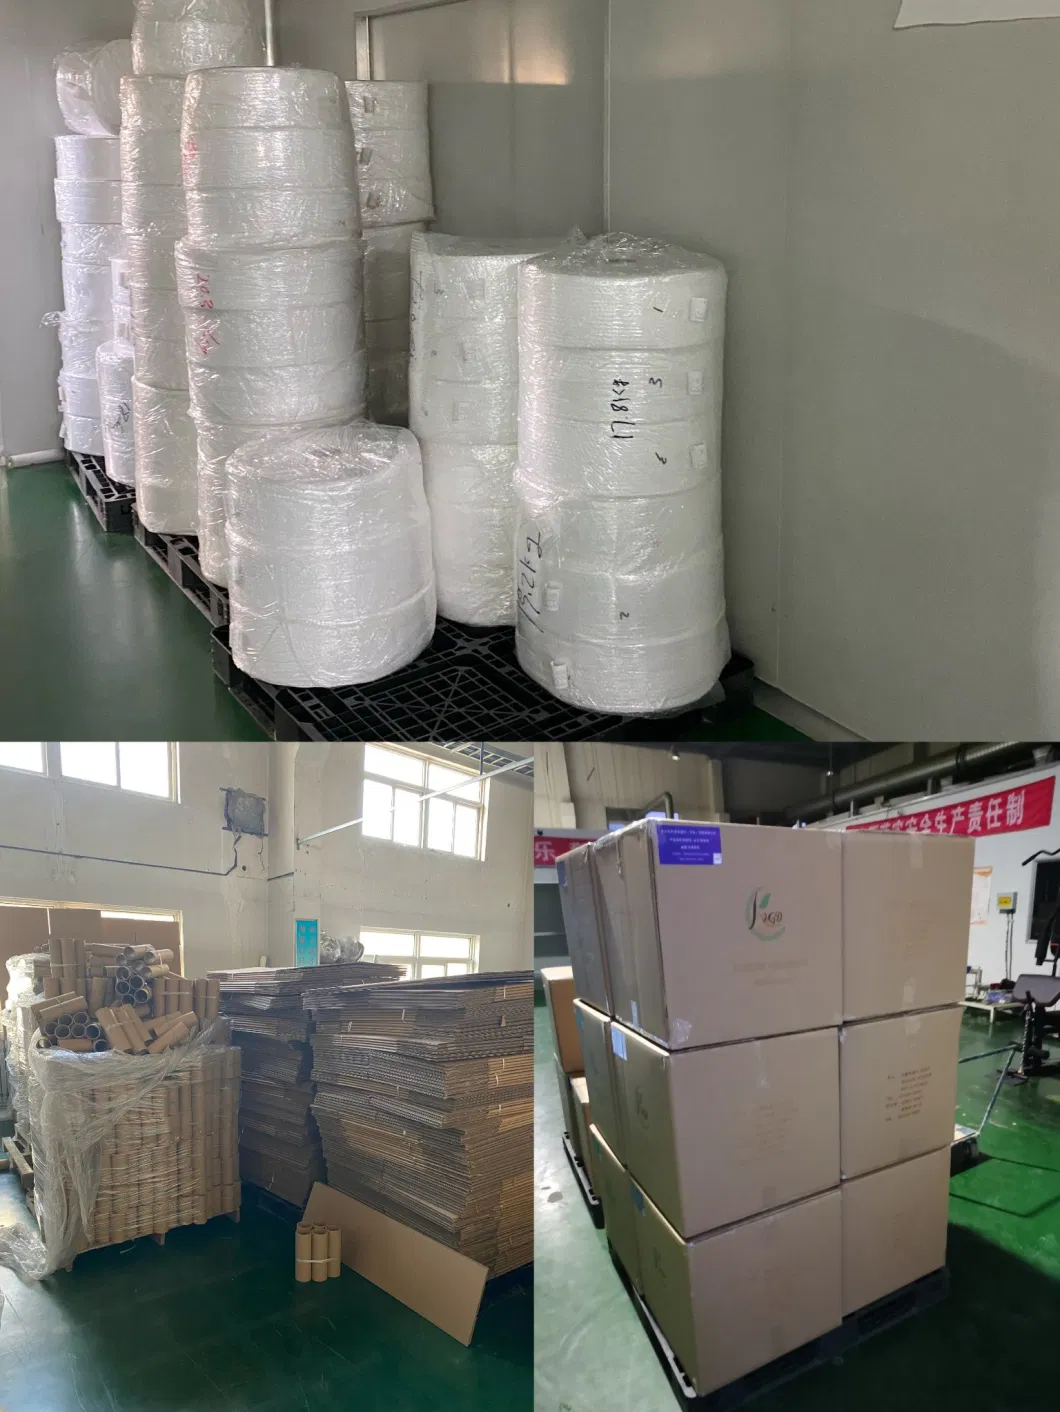 25GSM 175mm Bfe99 Filter Material Meltblown Nonwoven for Mask